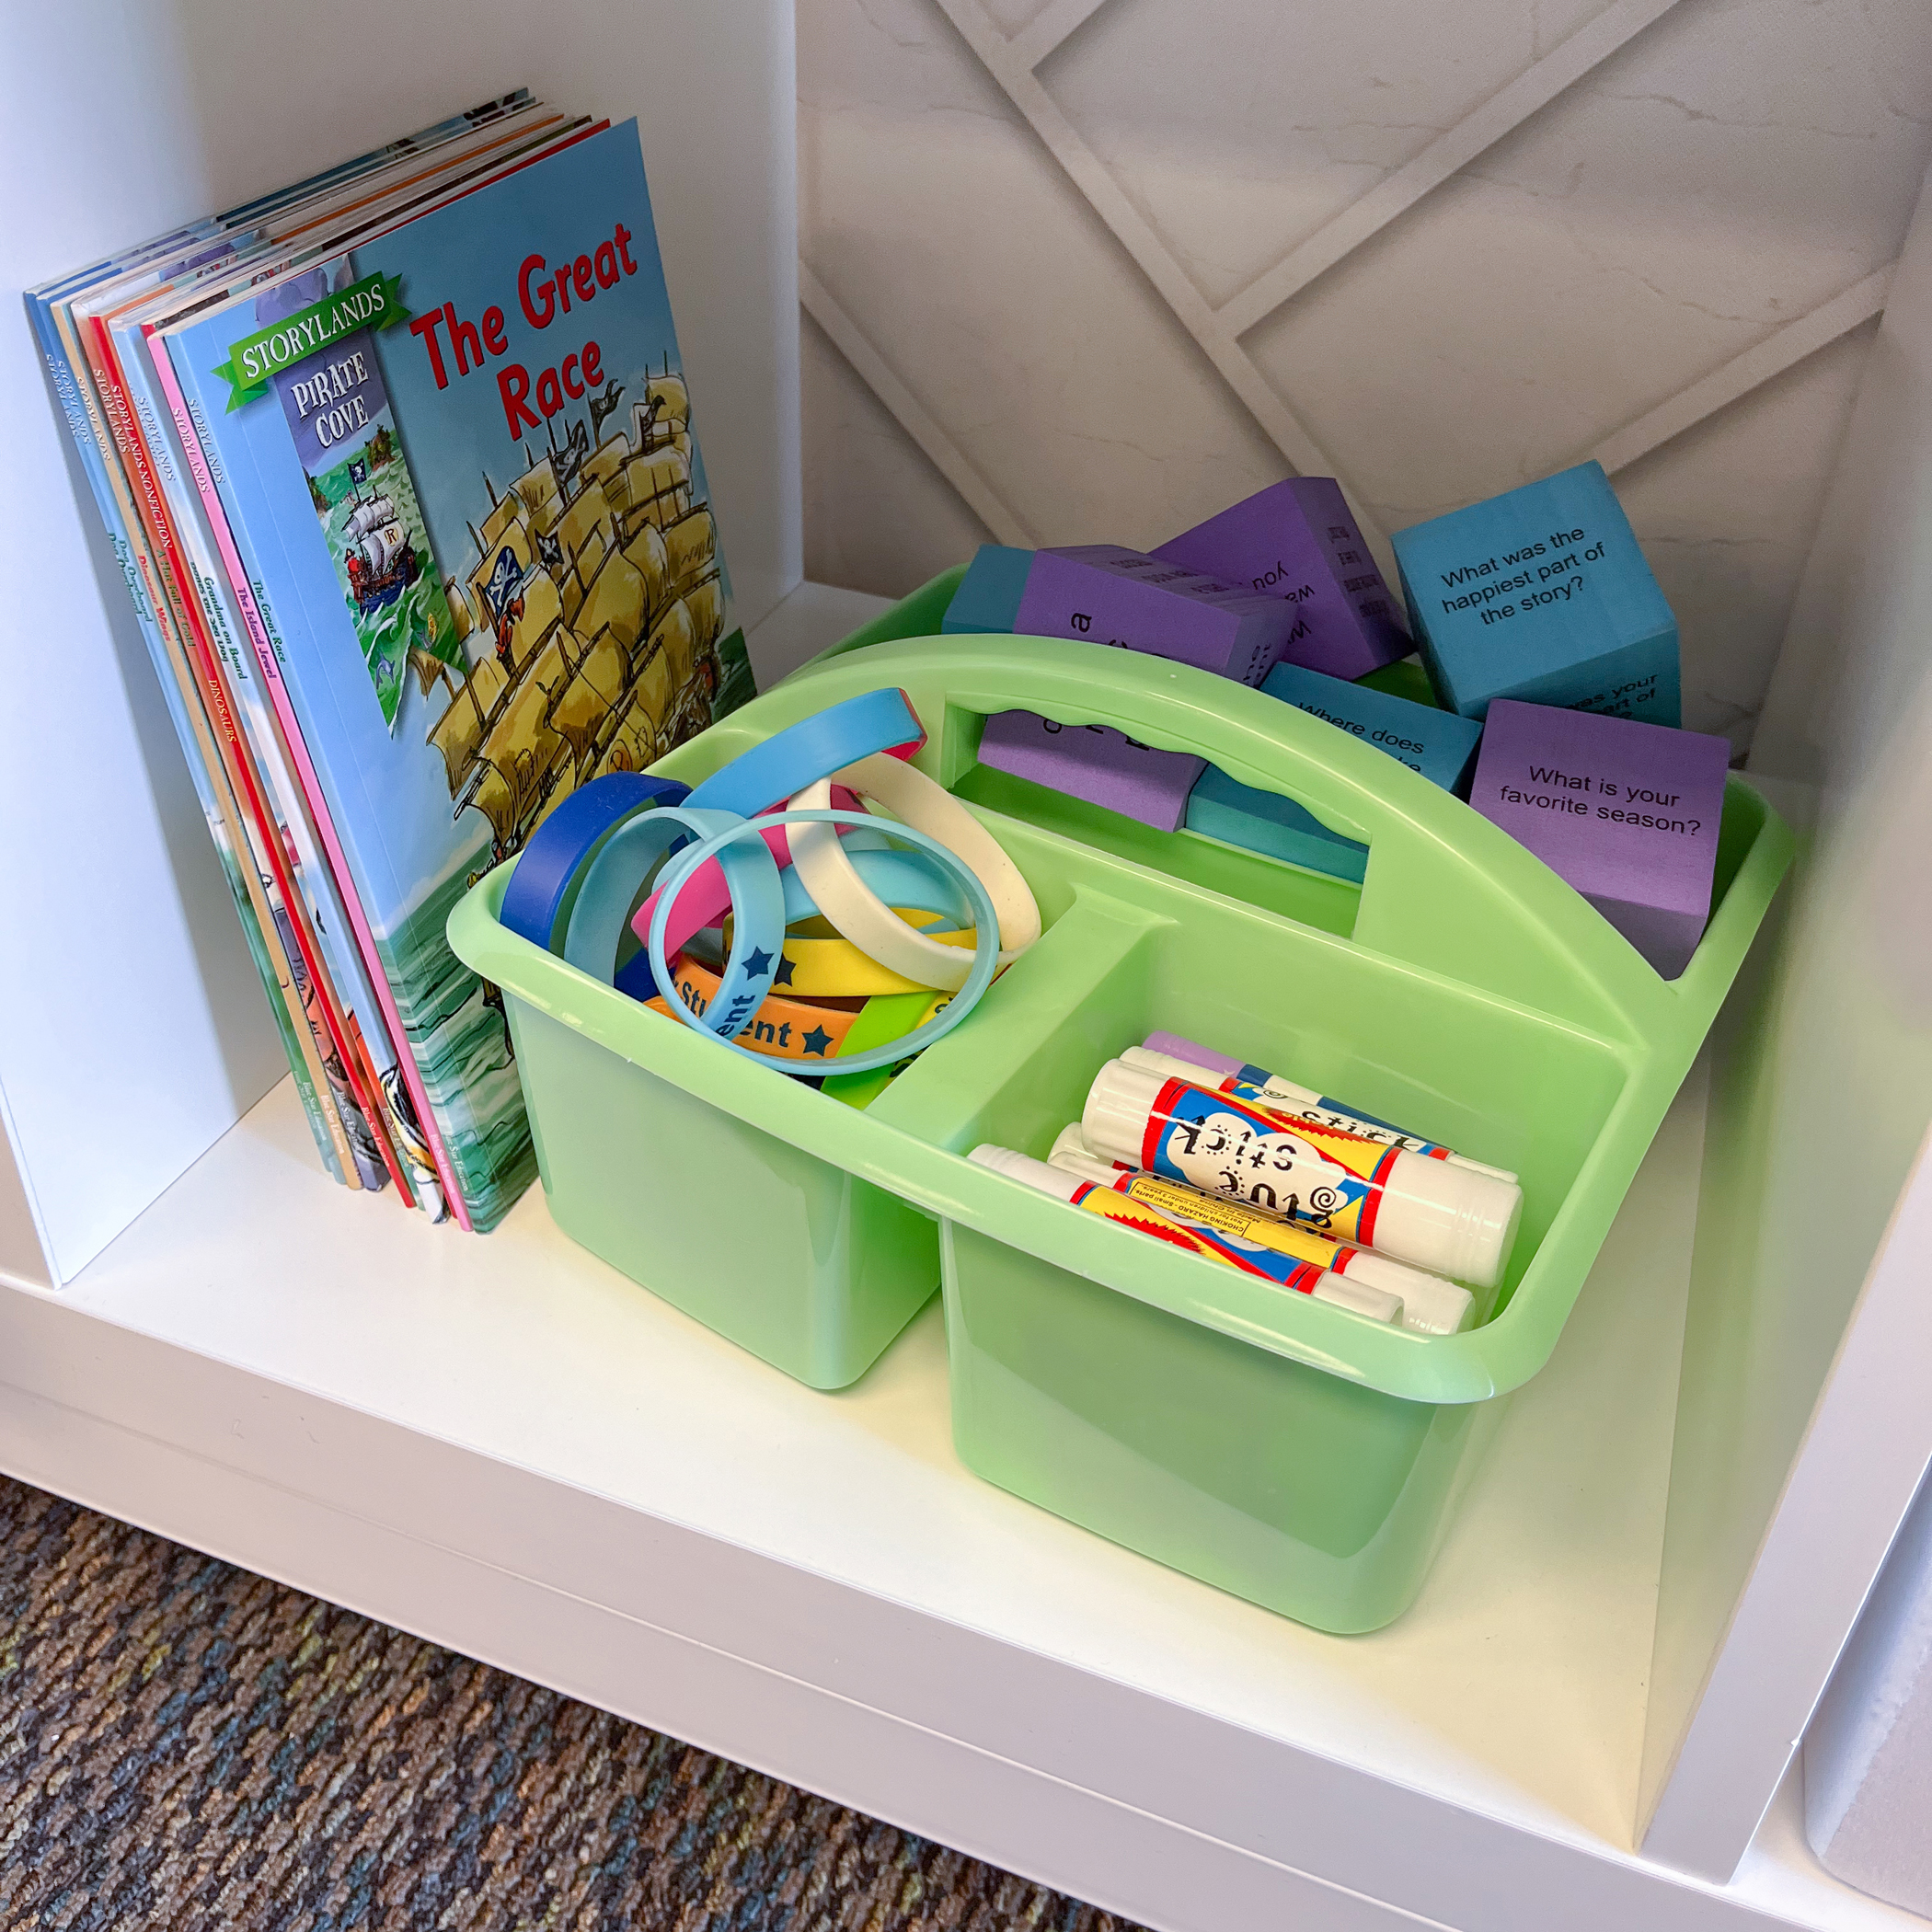 Pink Plastic Storage Caddy - TCR20908, Teacher Created Resources